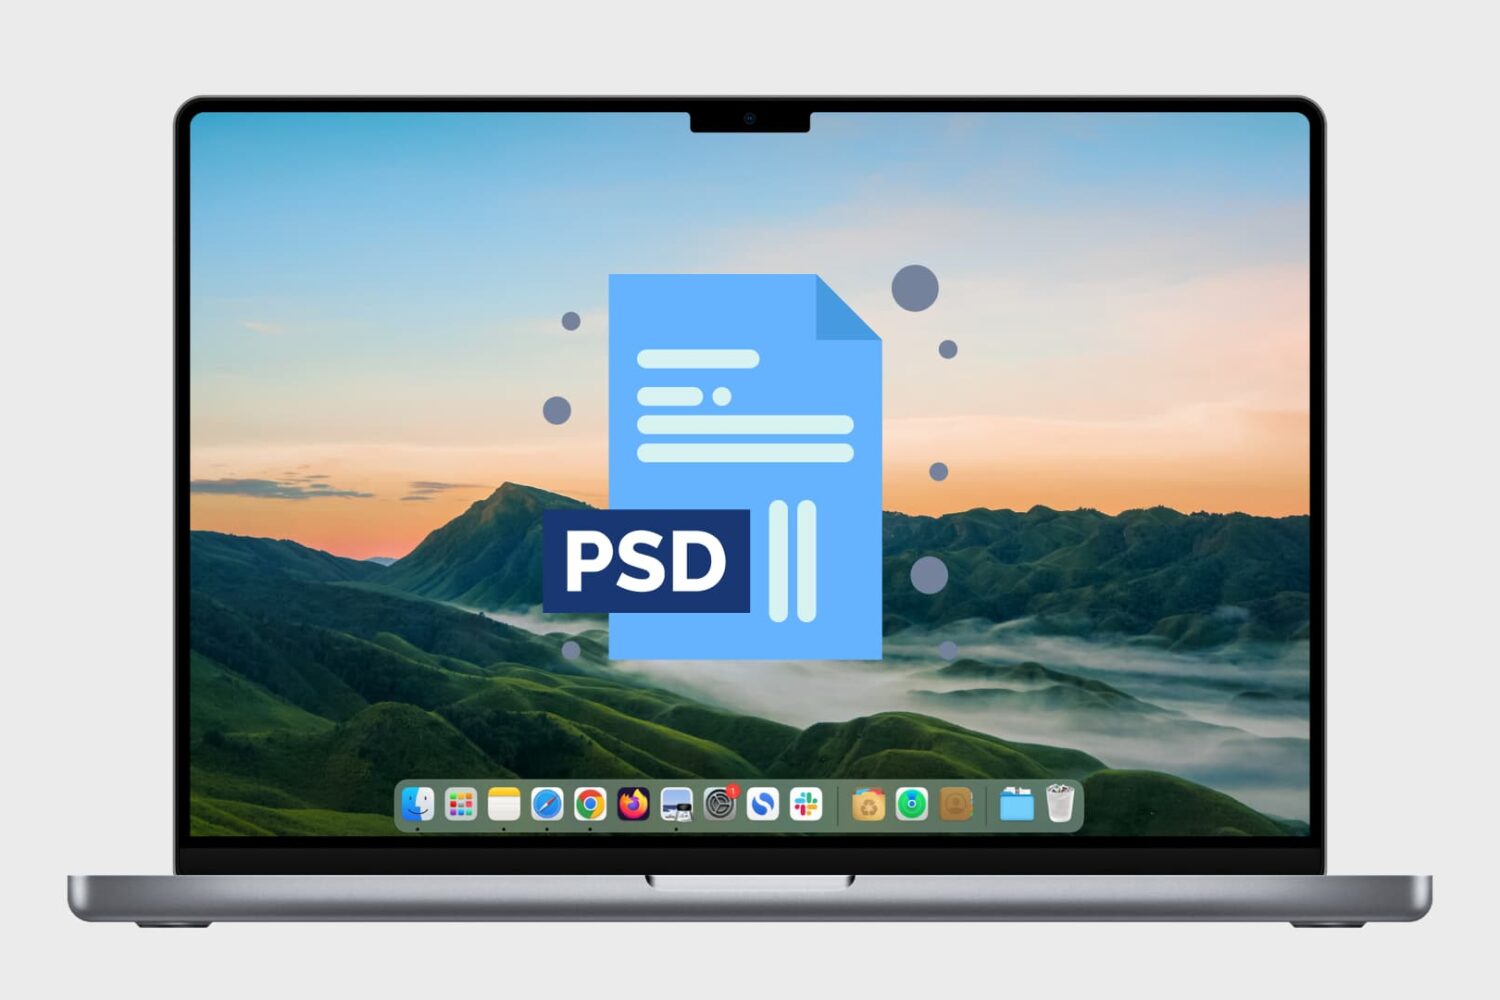 MacBook with PSD icon over its screen